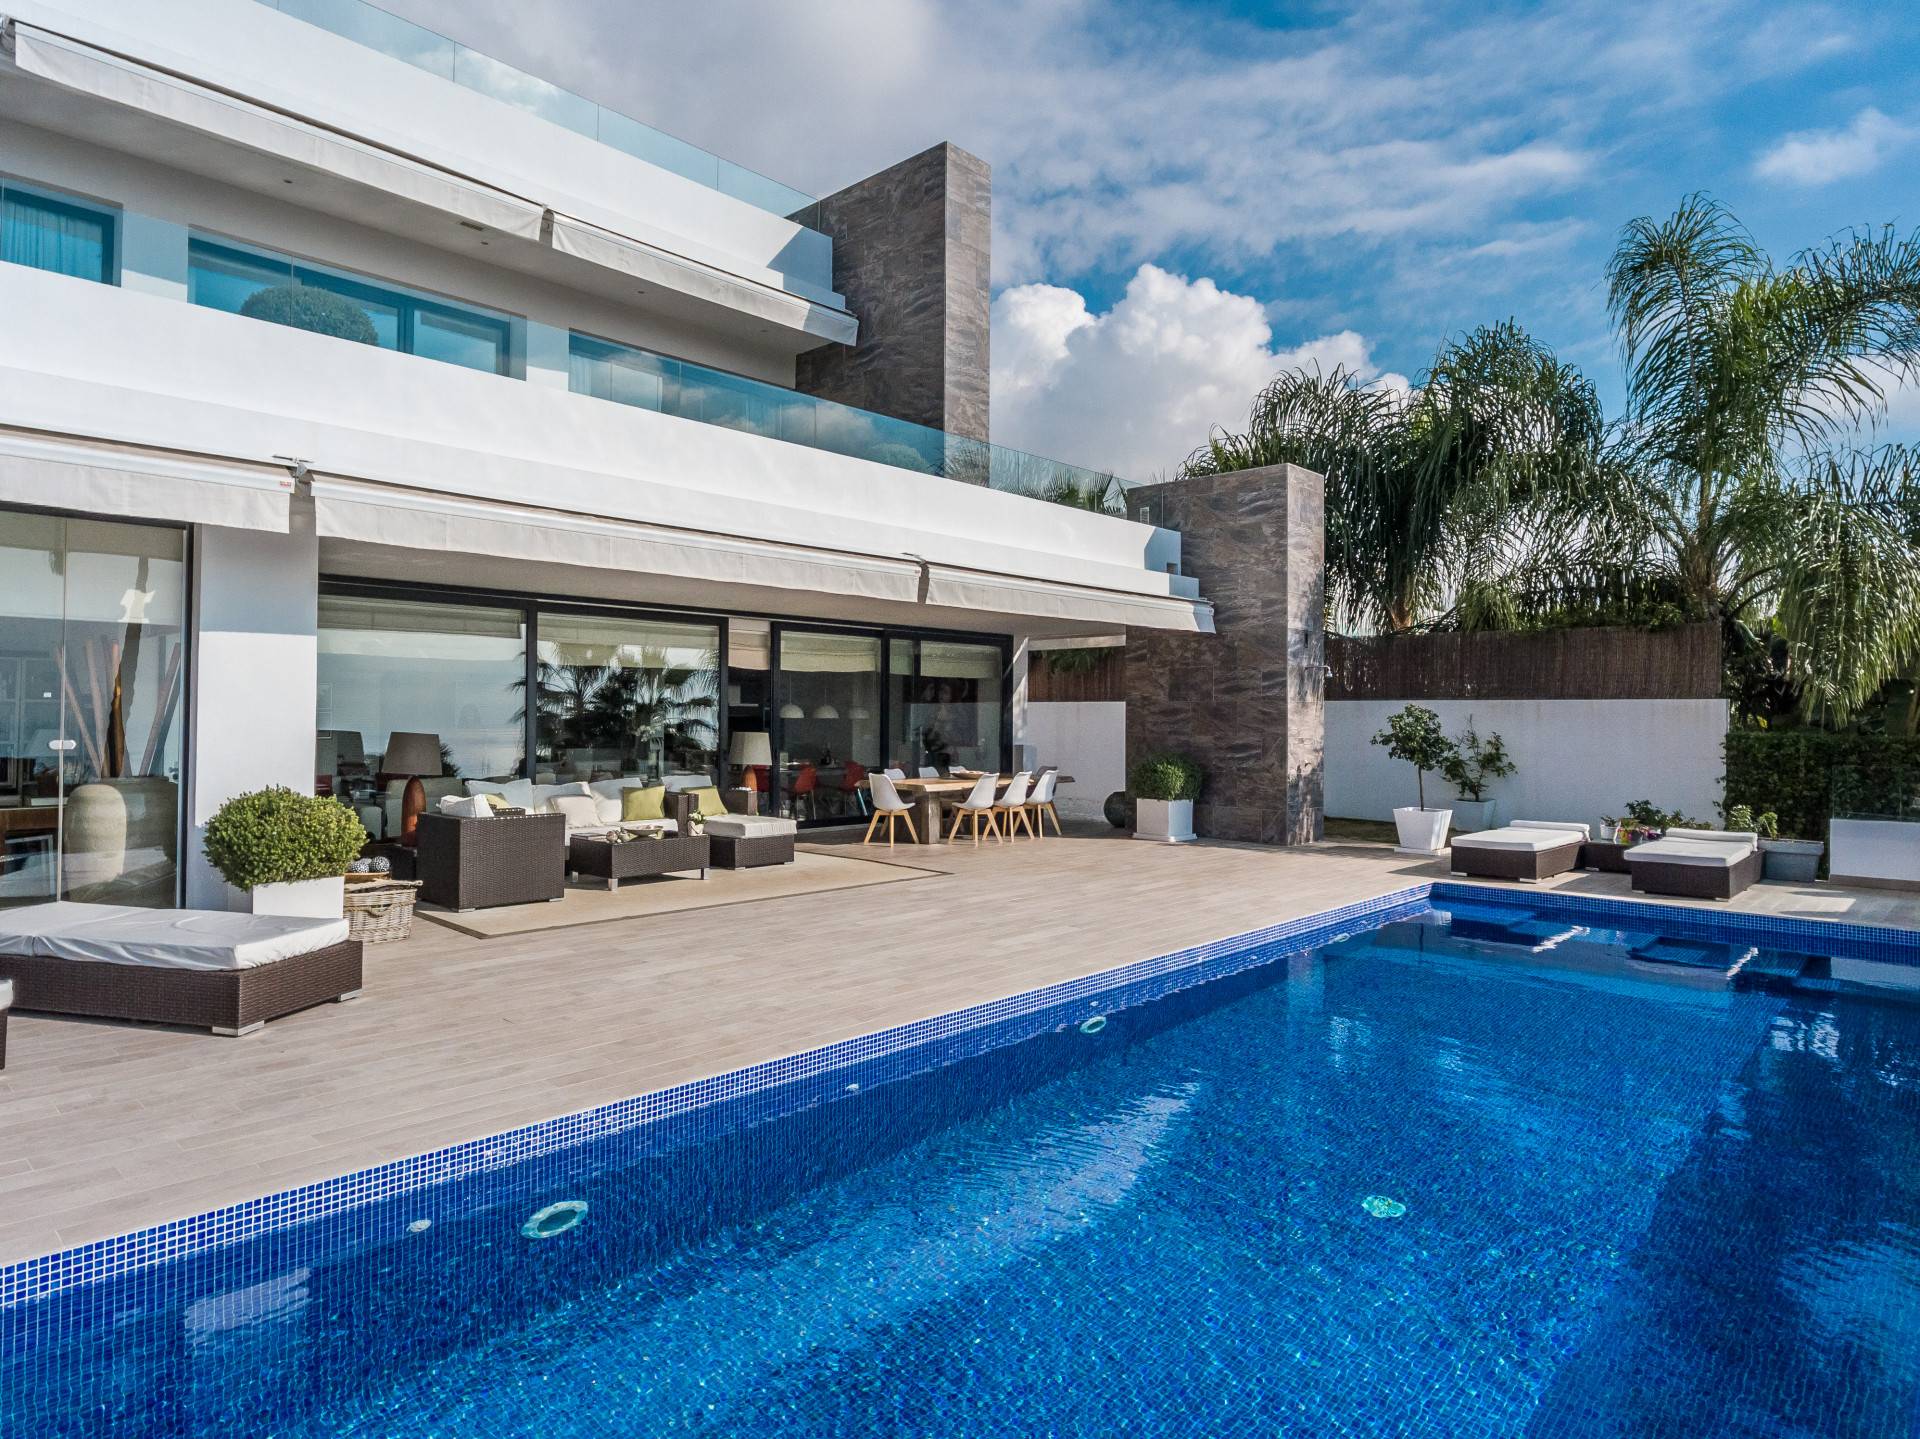 Outstanding in its innovative design and excellent materials, this contemporary home is located boarding Sierra Blanca, in a prestigious gated community of villas in Nagueles, one of Marbella s most ...